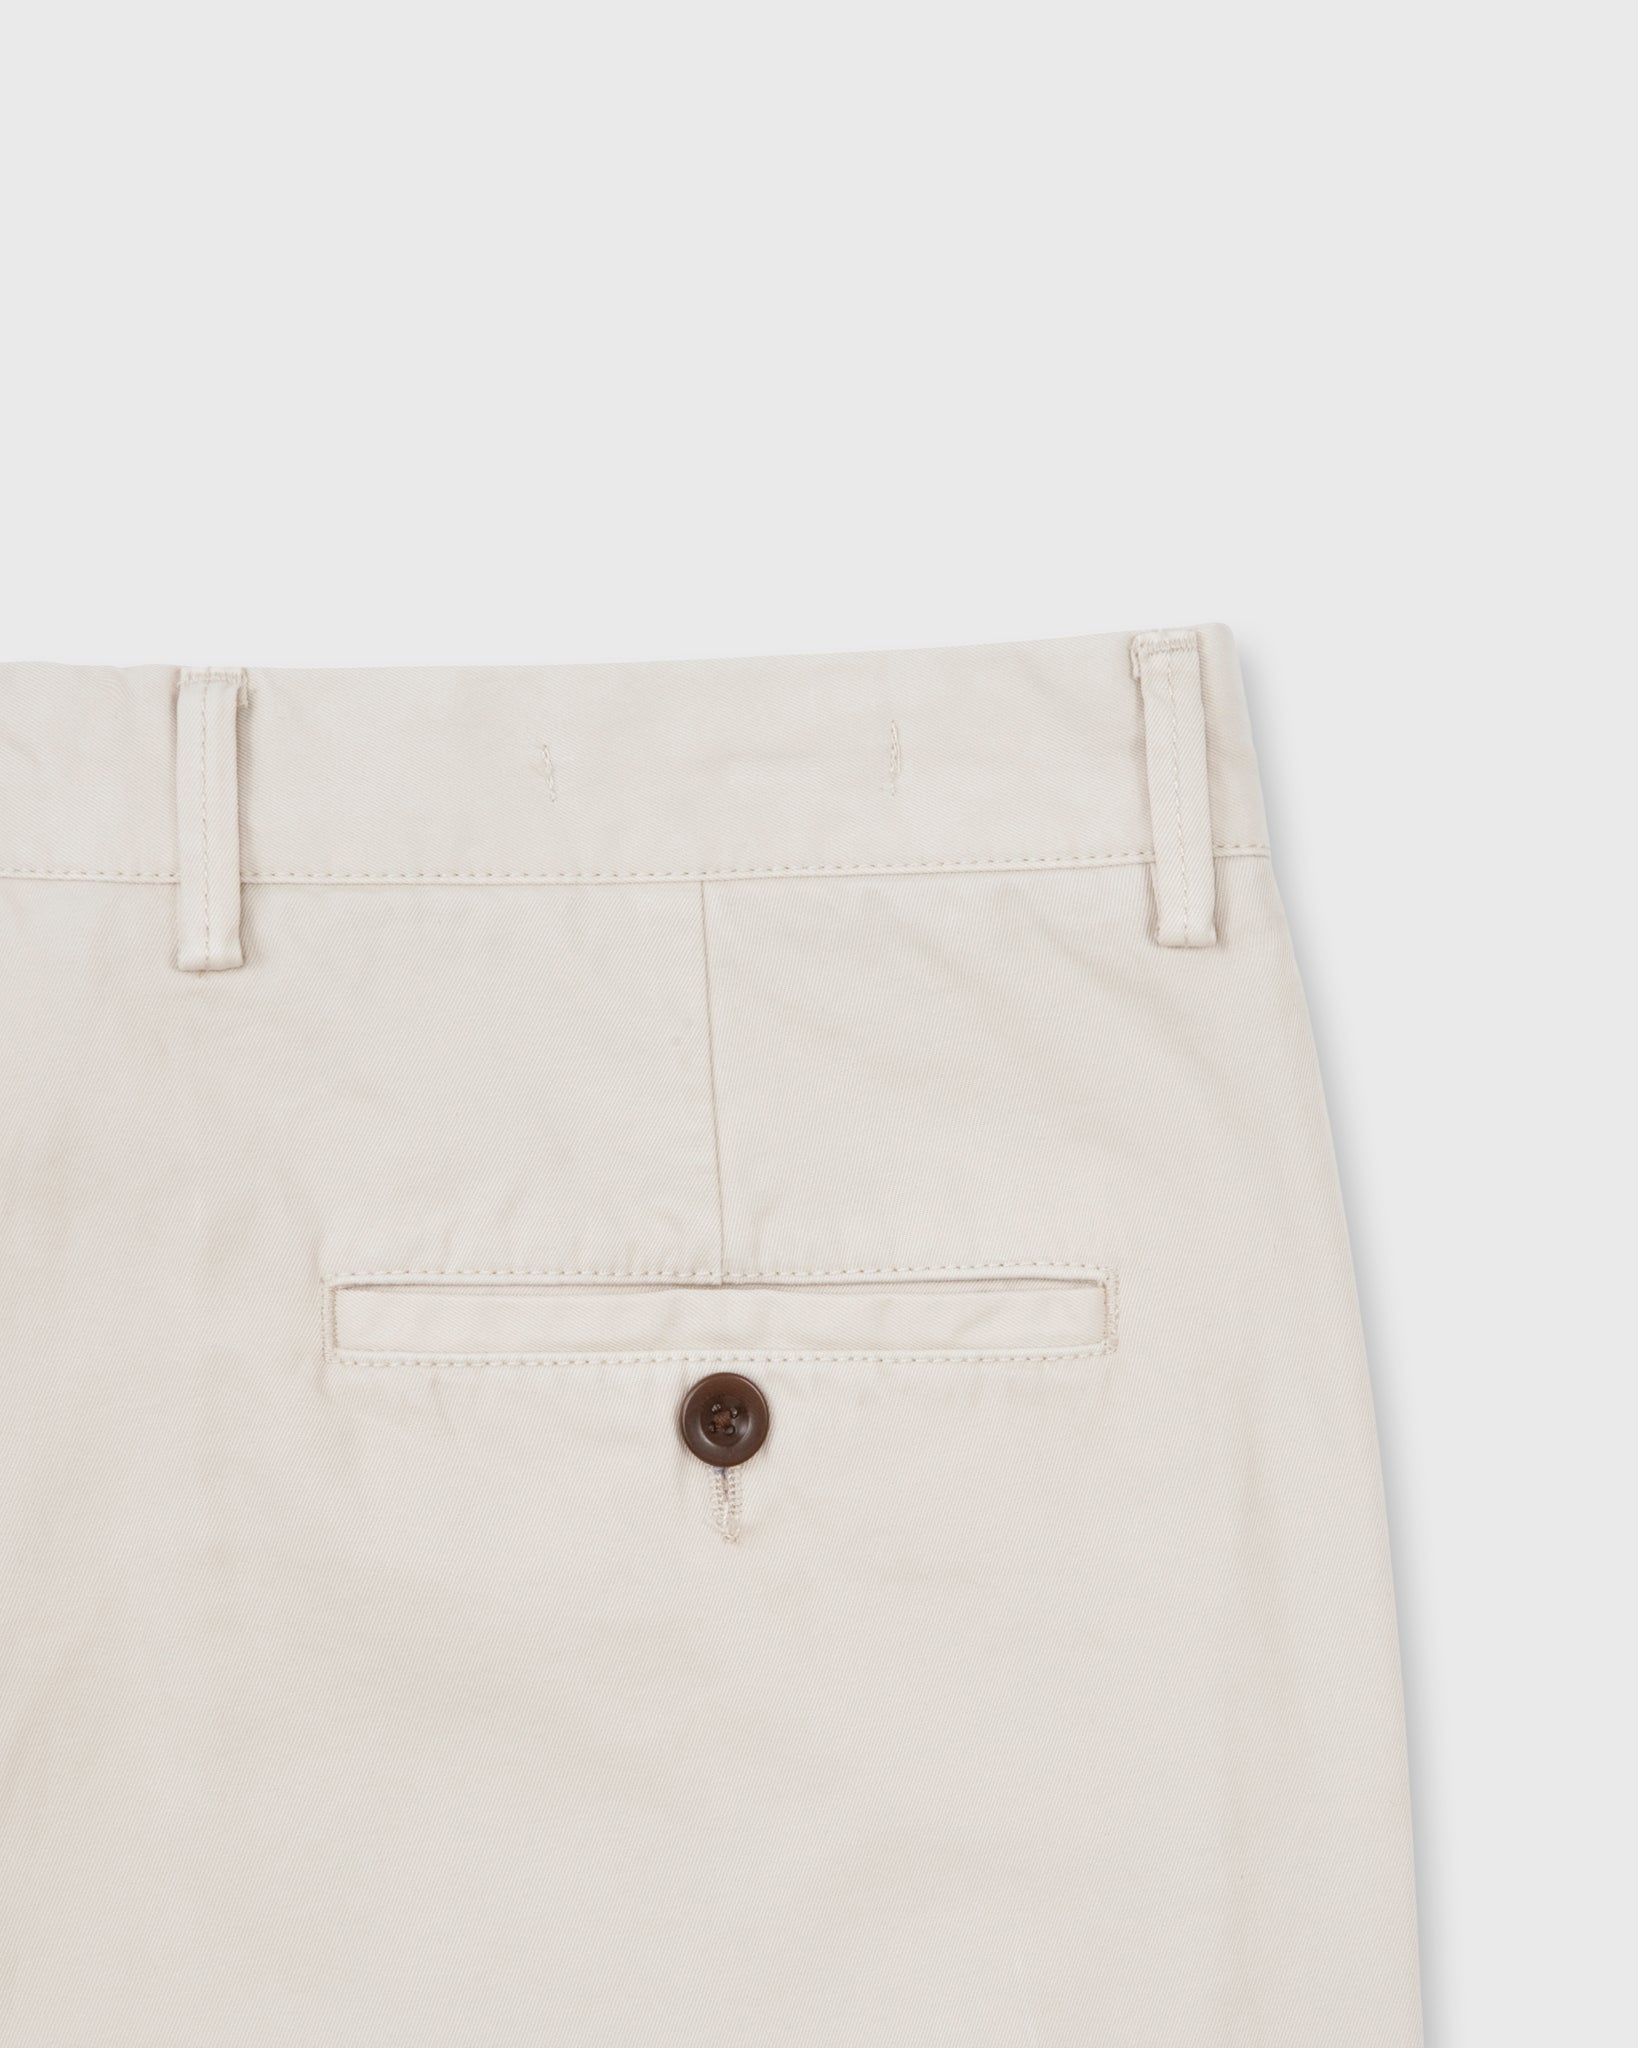 Garment-Dyed Field Pant in Stone AP Lightweight Twill